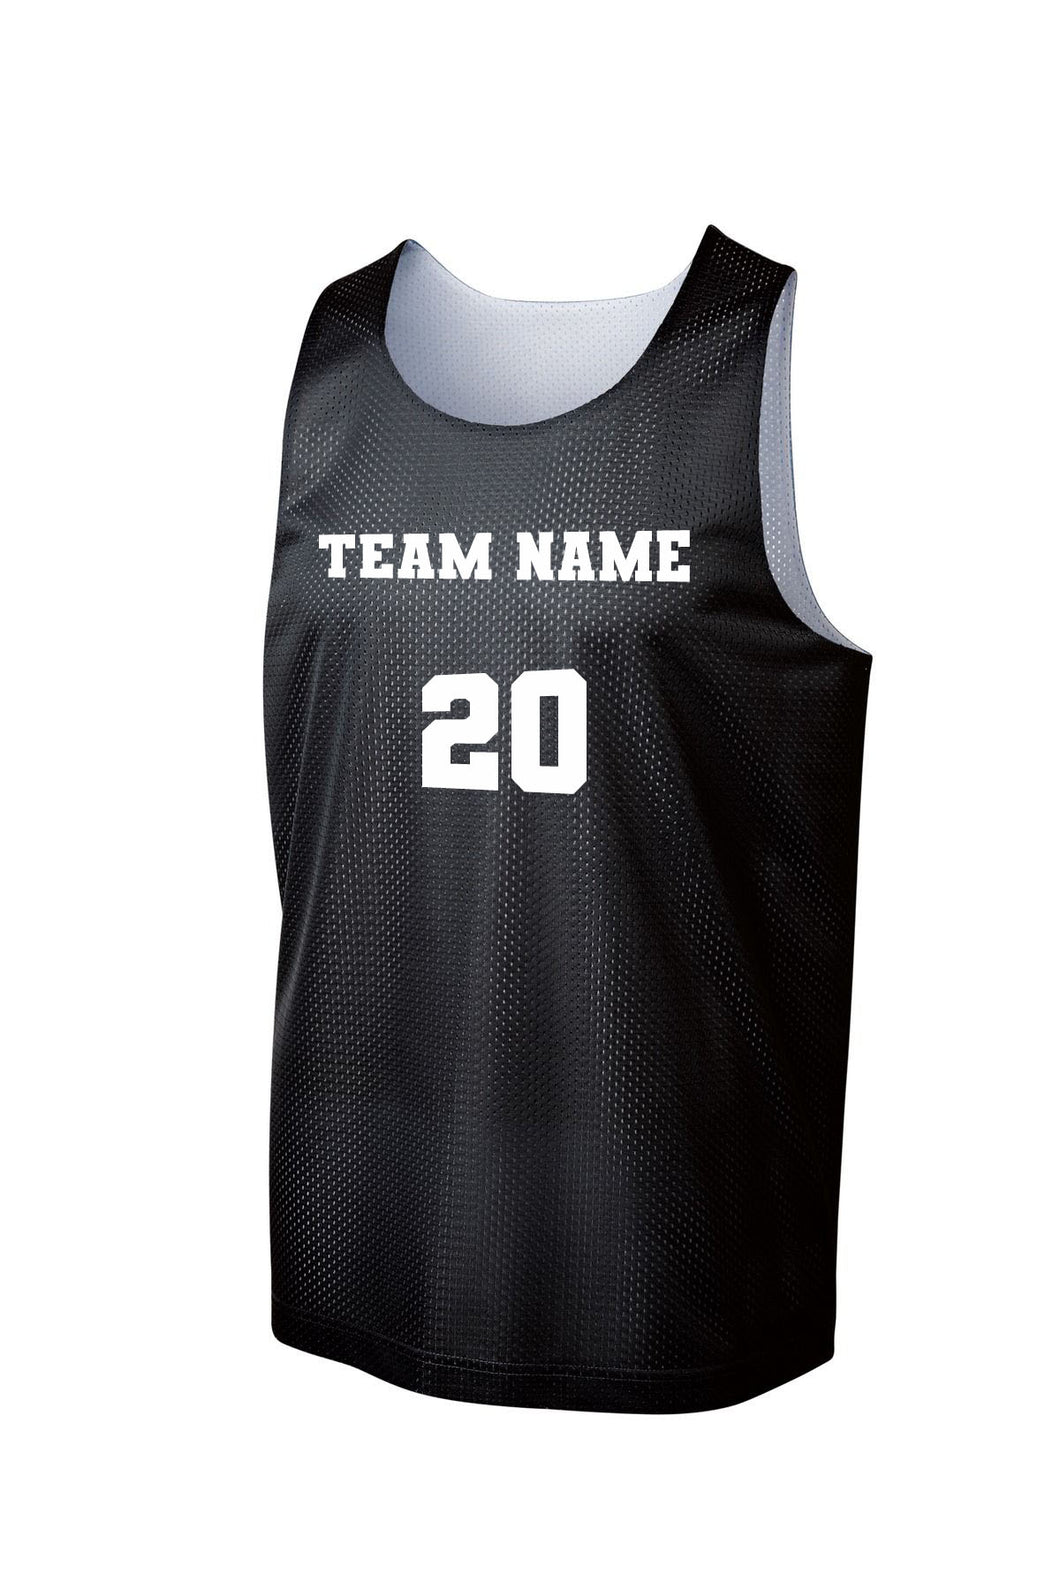 Custom Men Youth Reversible Basketball Jersey Uniform Printed Personalized  Name Number Sportswear Big Size 